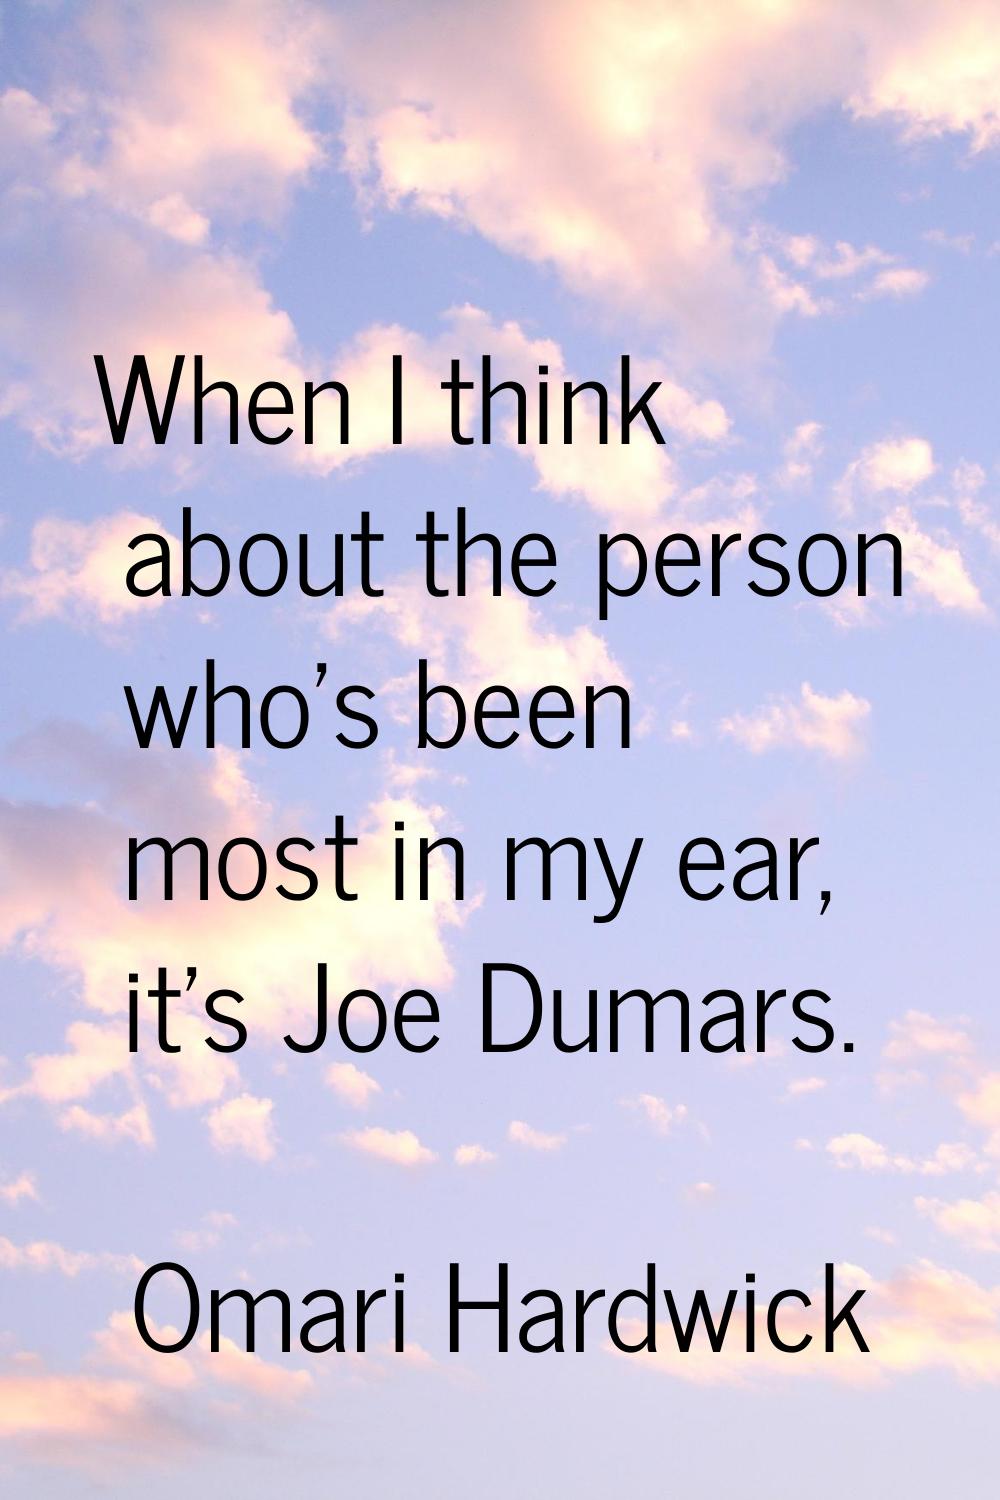 When I think about the person who's been most in my ear, it's Joe Dumars.